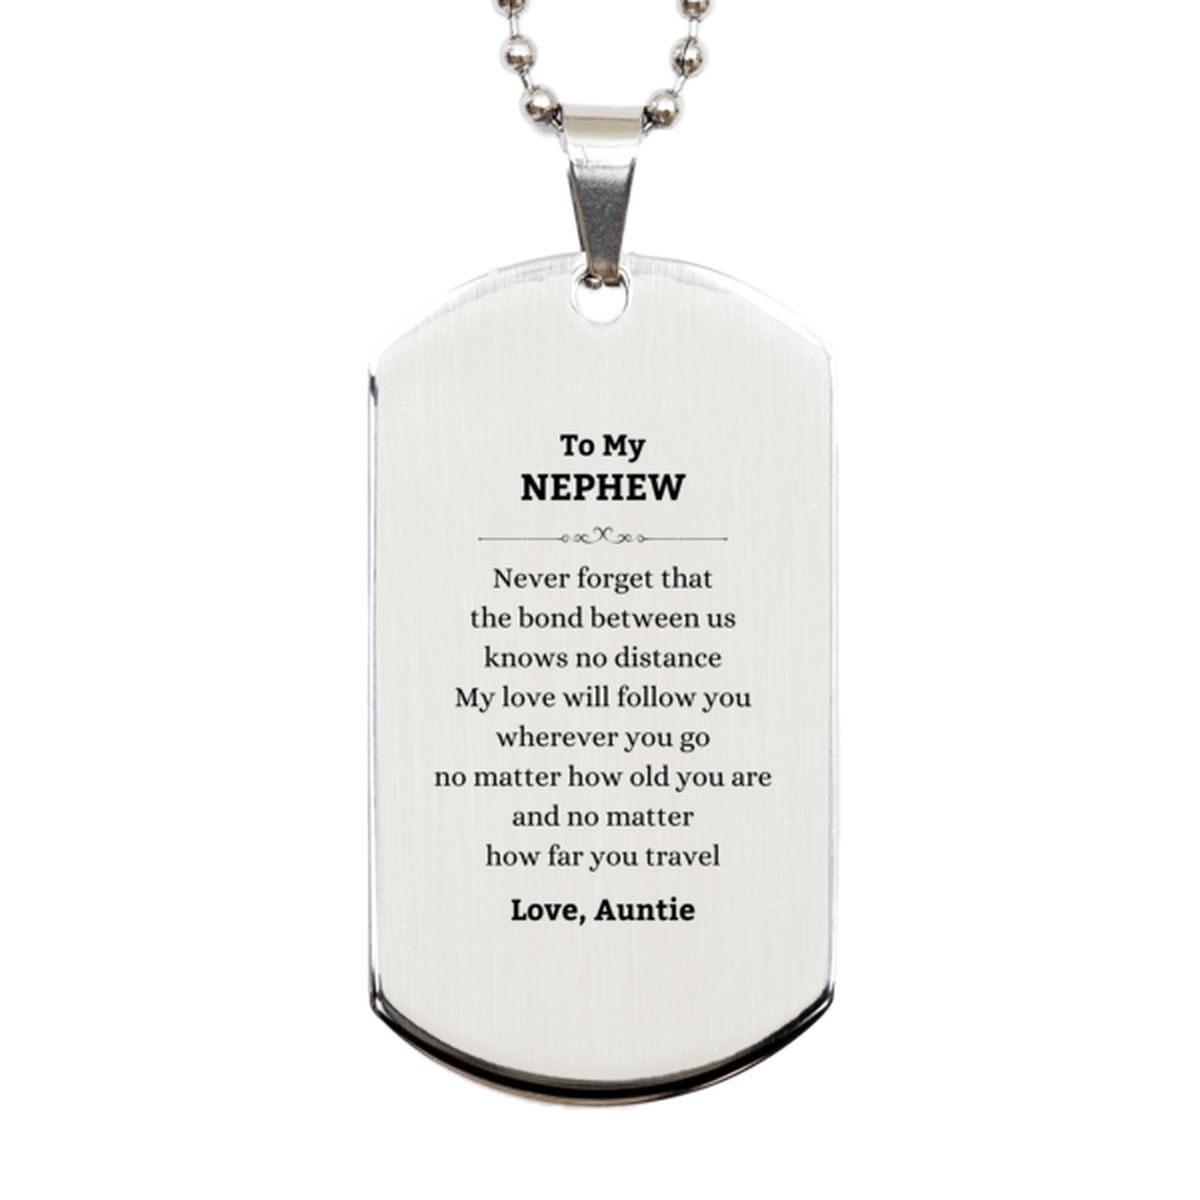 Nephew Birthday Gifts from Auntie, Adjustable Silver Dog Tag for Nephew Christmas Graduation Unique Gifts Nephew Never forget that the bond between us knows no distance. Love, Auntie